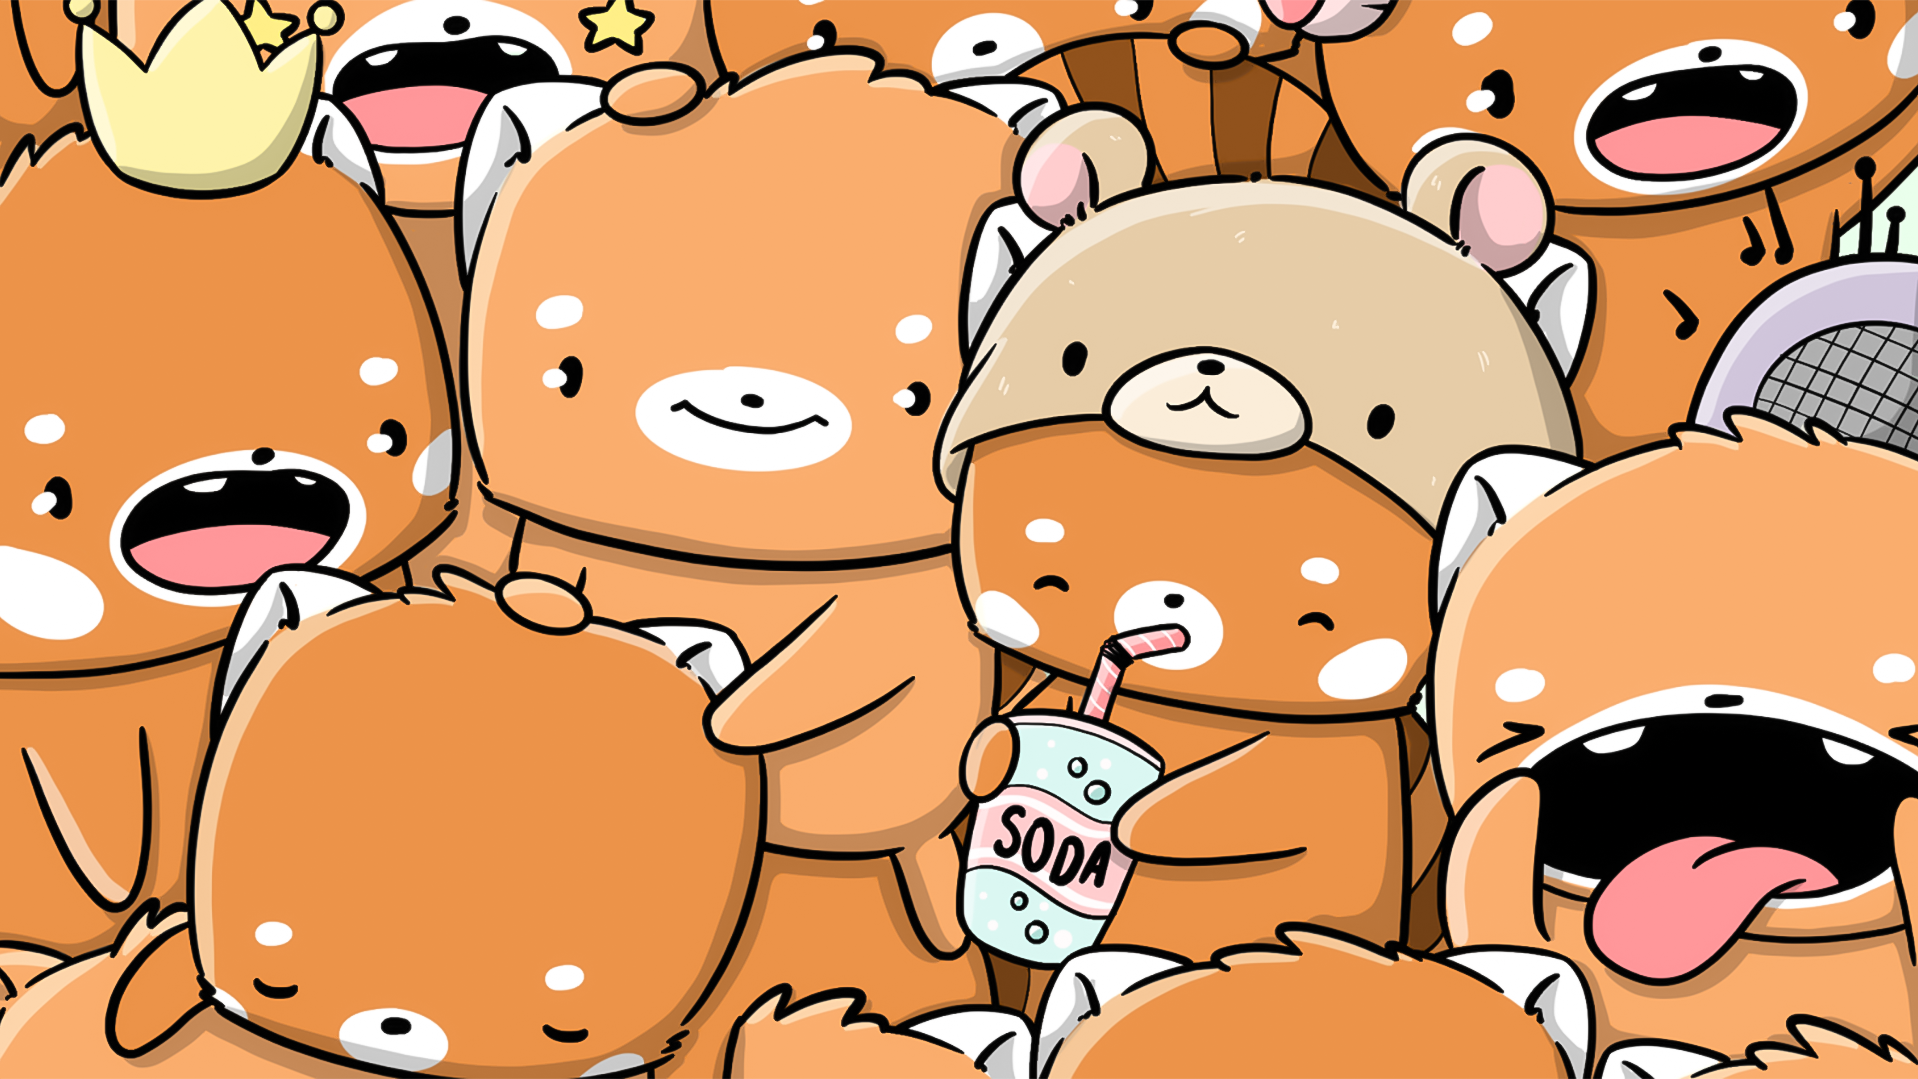 CUTE BEAR ILLUSTRATION TO USE AS LAPTOP WALLPAPER